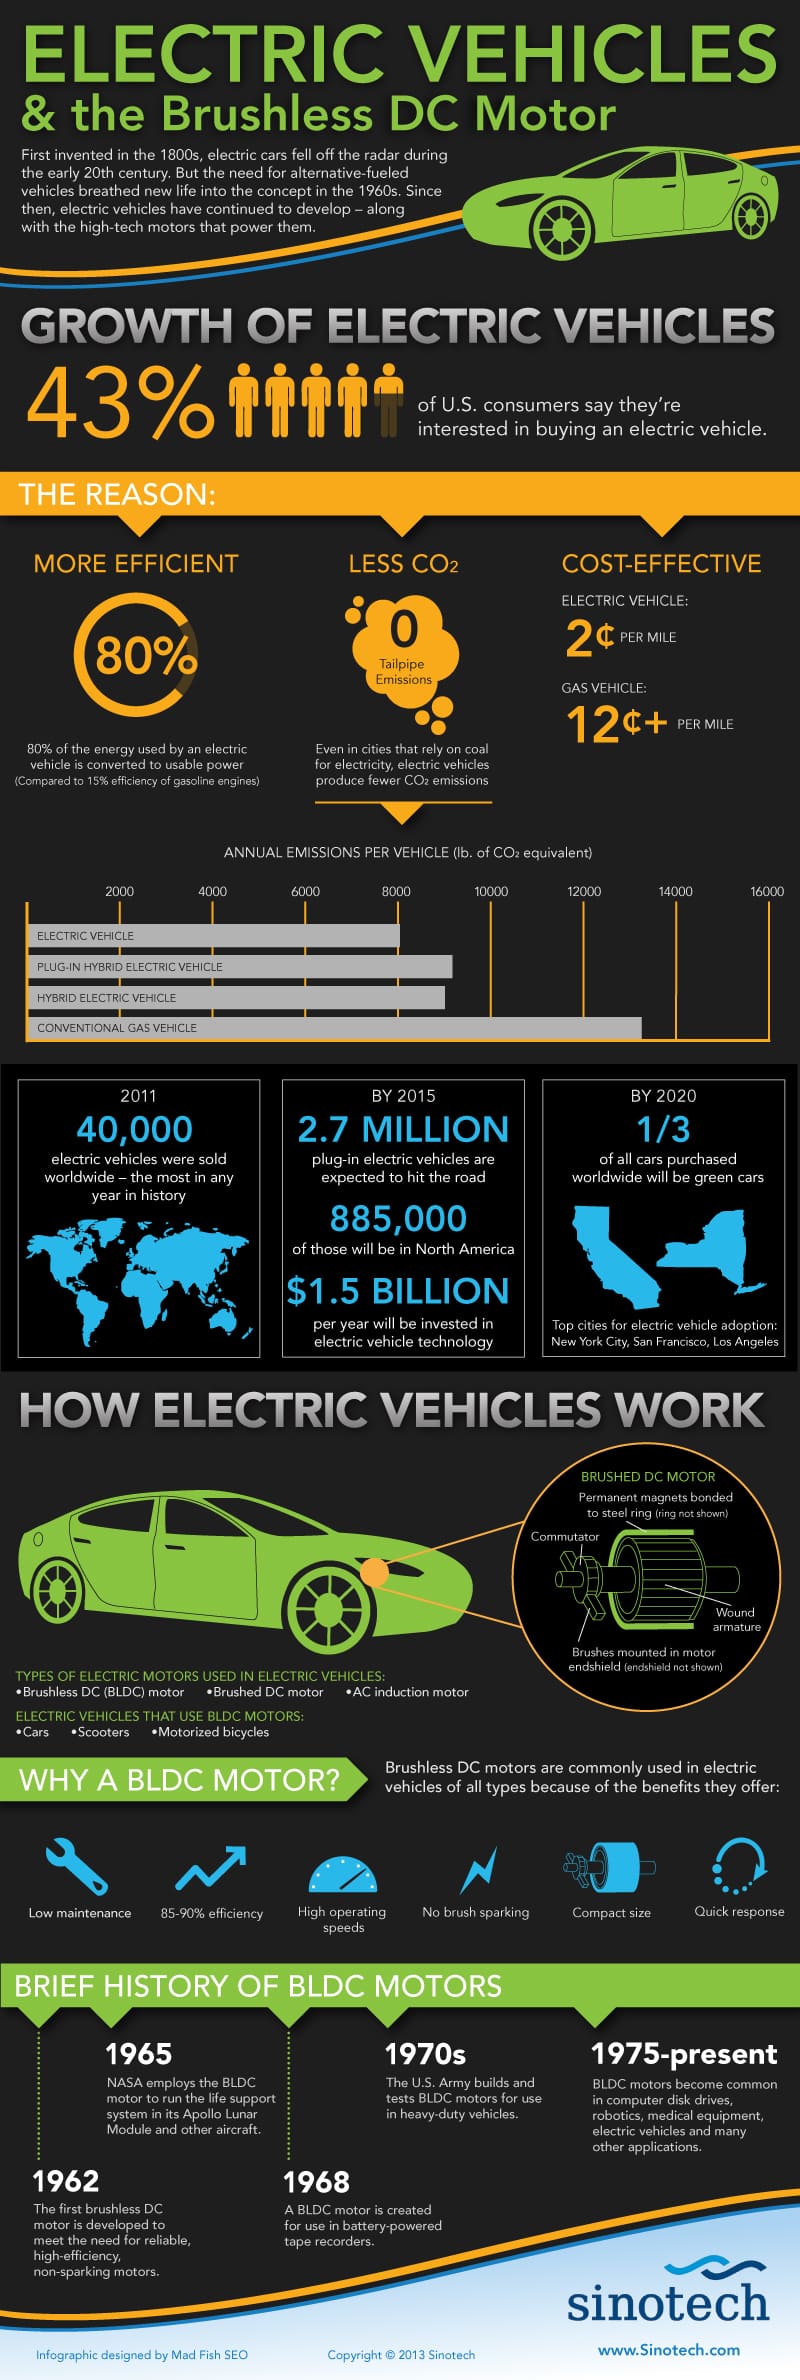 Sinotech Electric Vehicles & The Brushless DC Motor [Infographic]